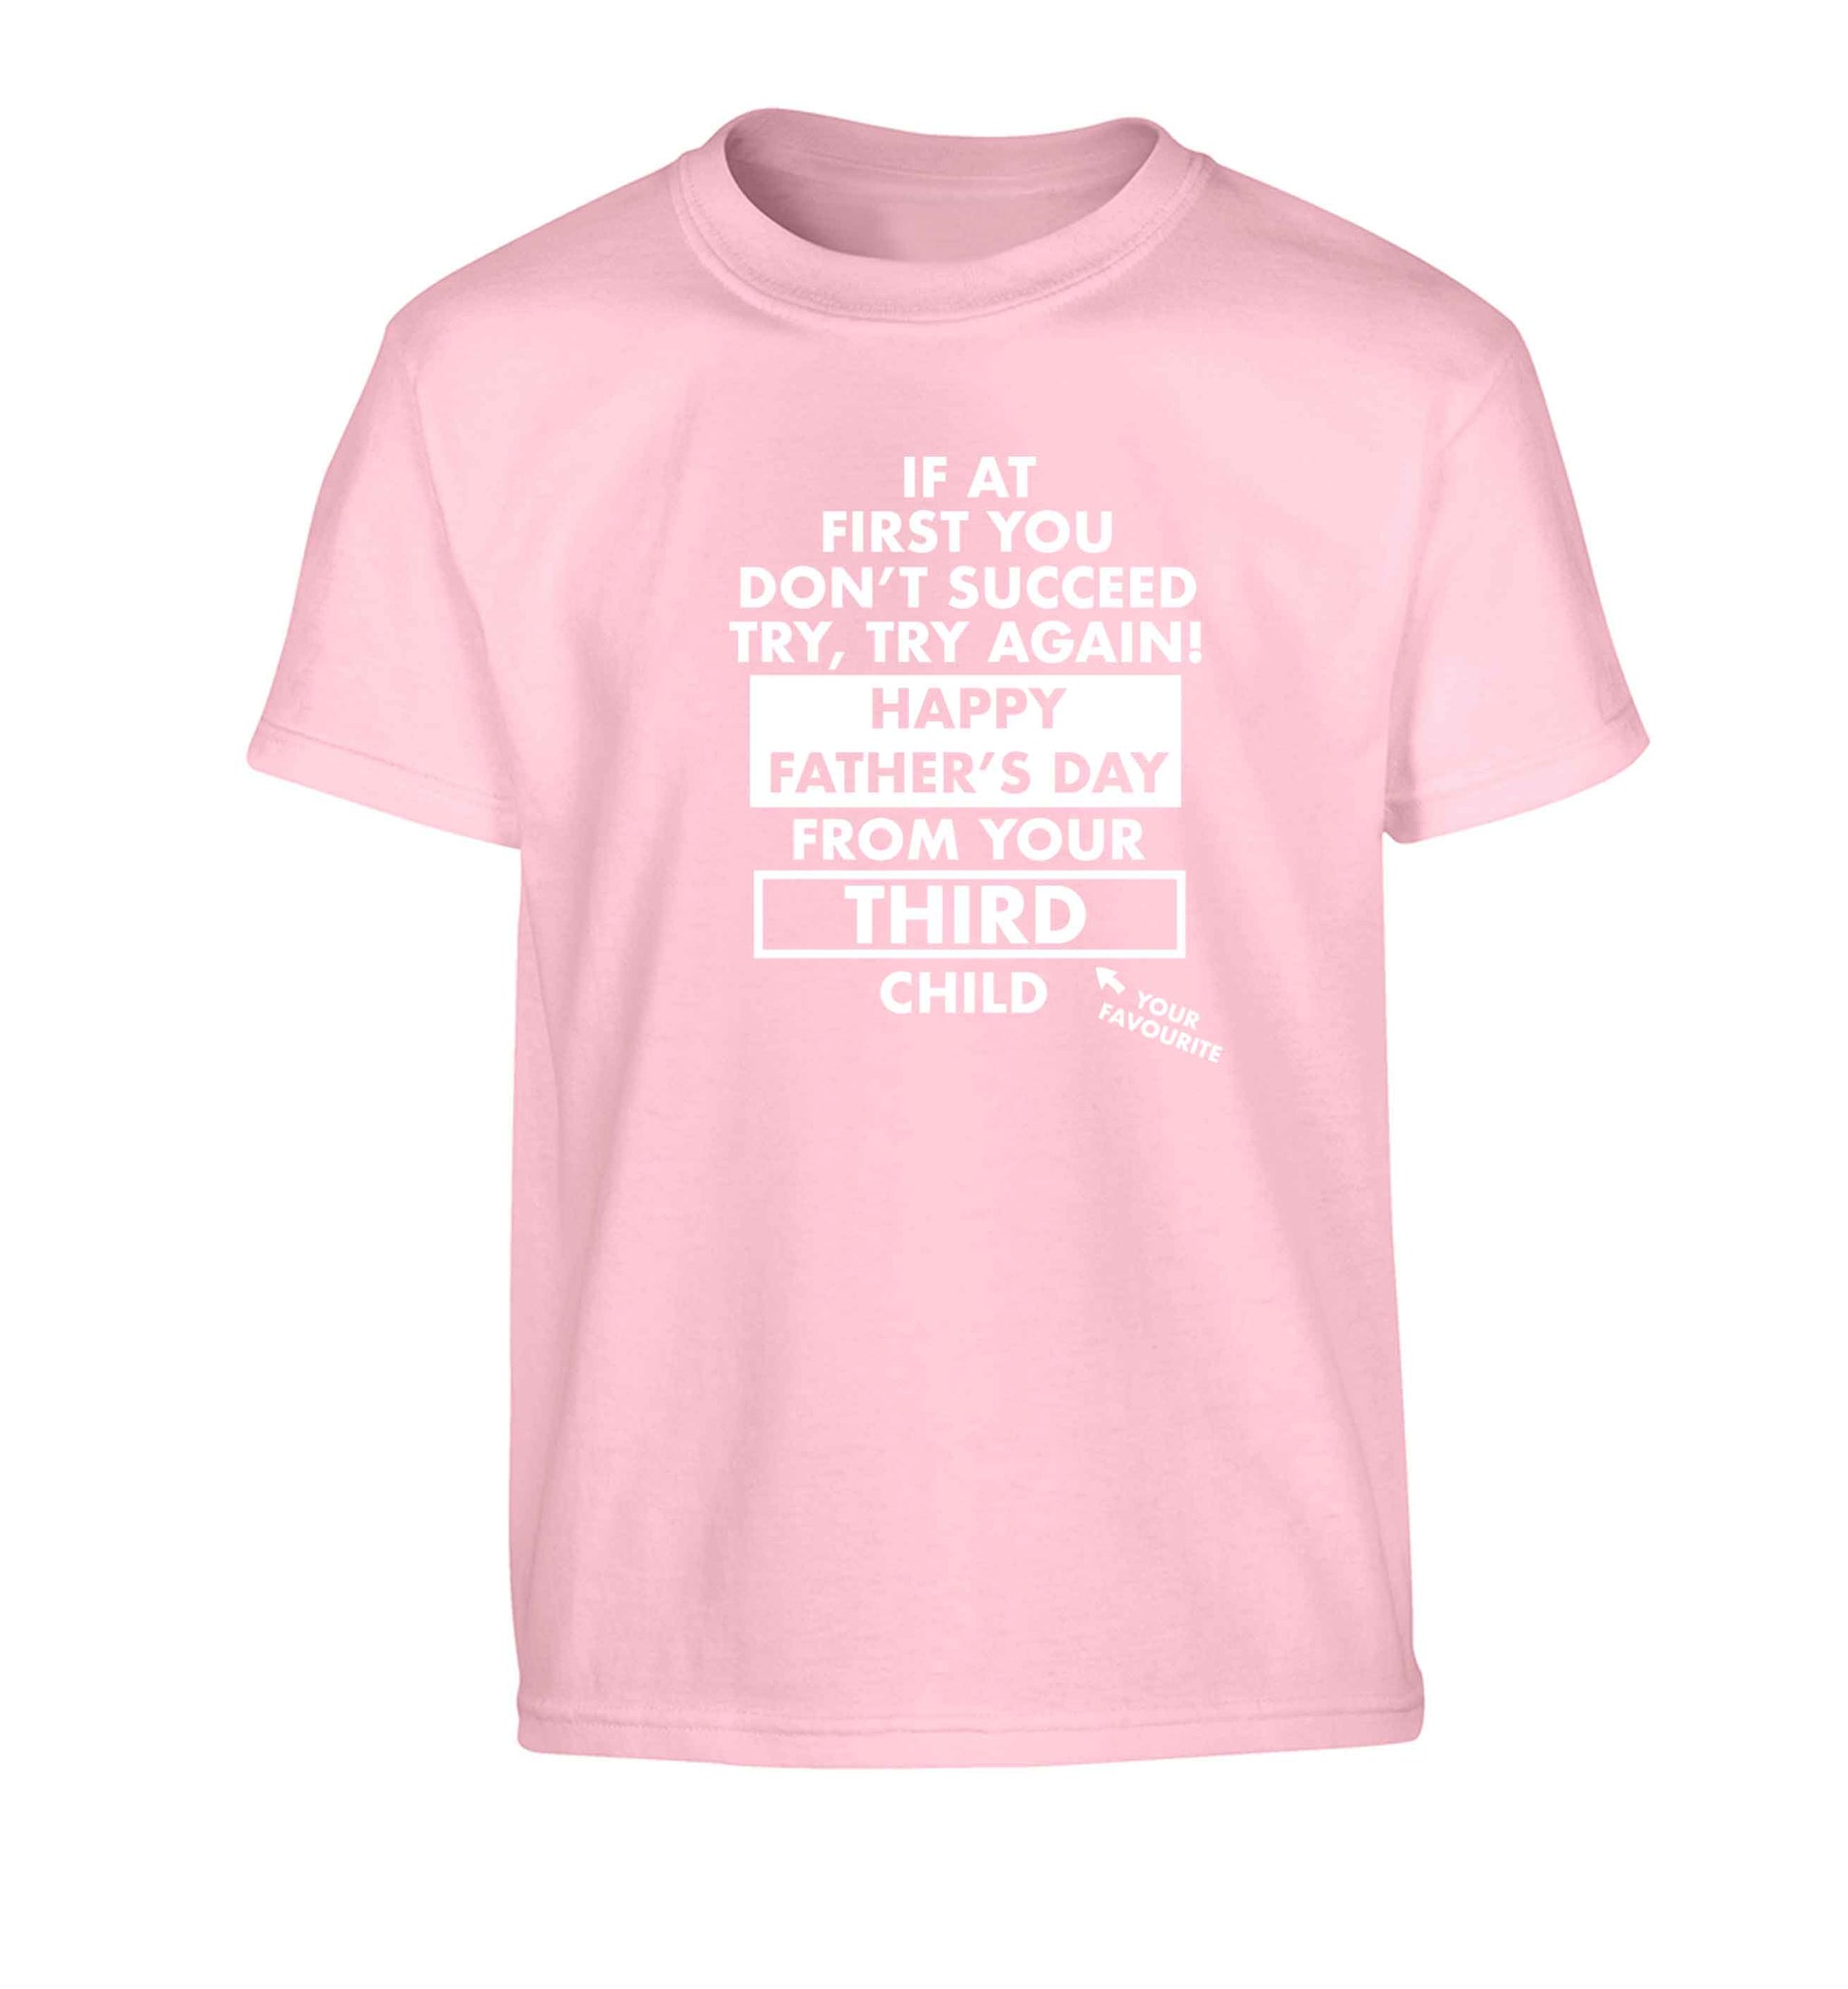 If at first you don't succeed try, try again Happy Father's day from your third child! Children's light pink Tshirt 12-13 Years